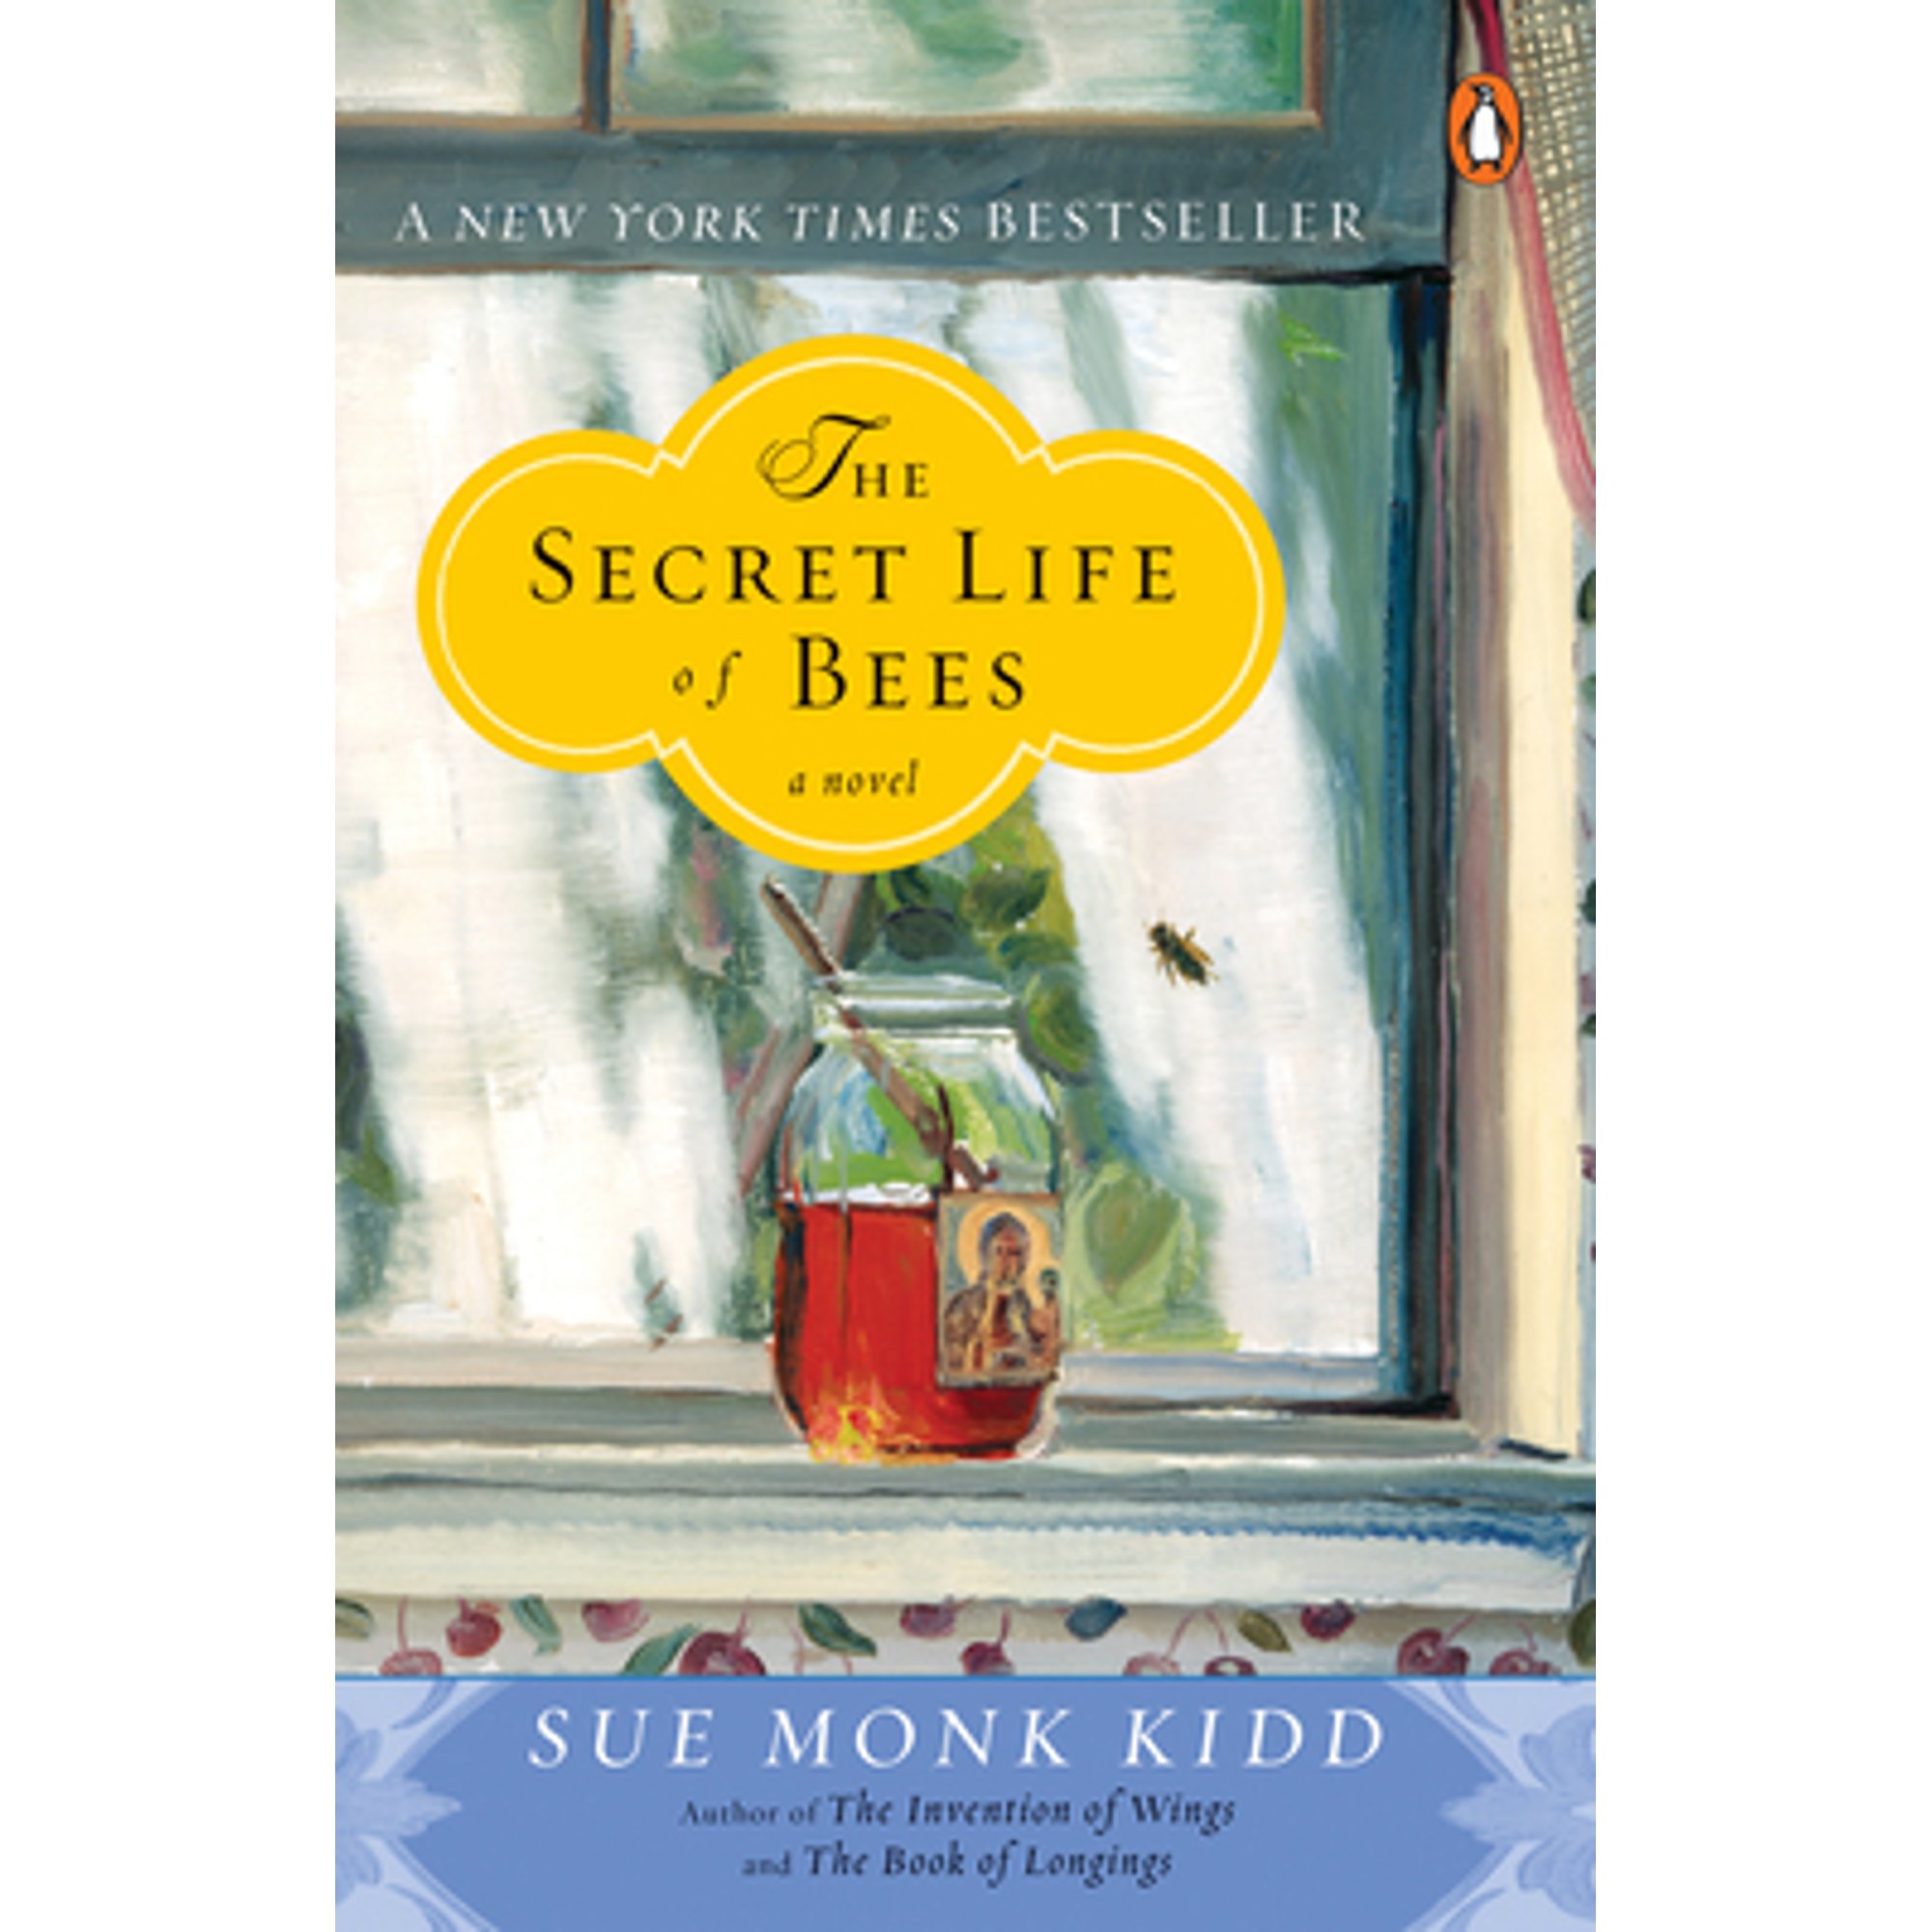 The Secret Life of Bees (Paperback) - image 1 of 1